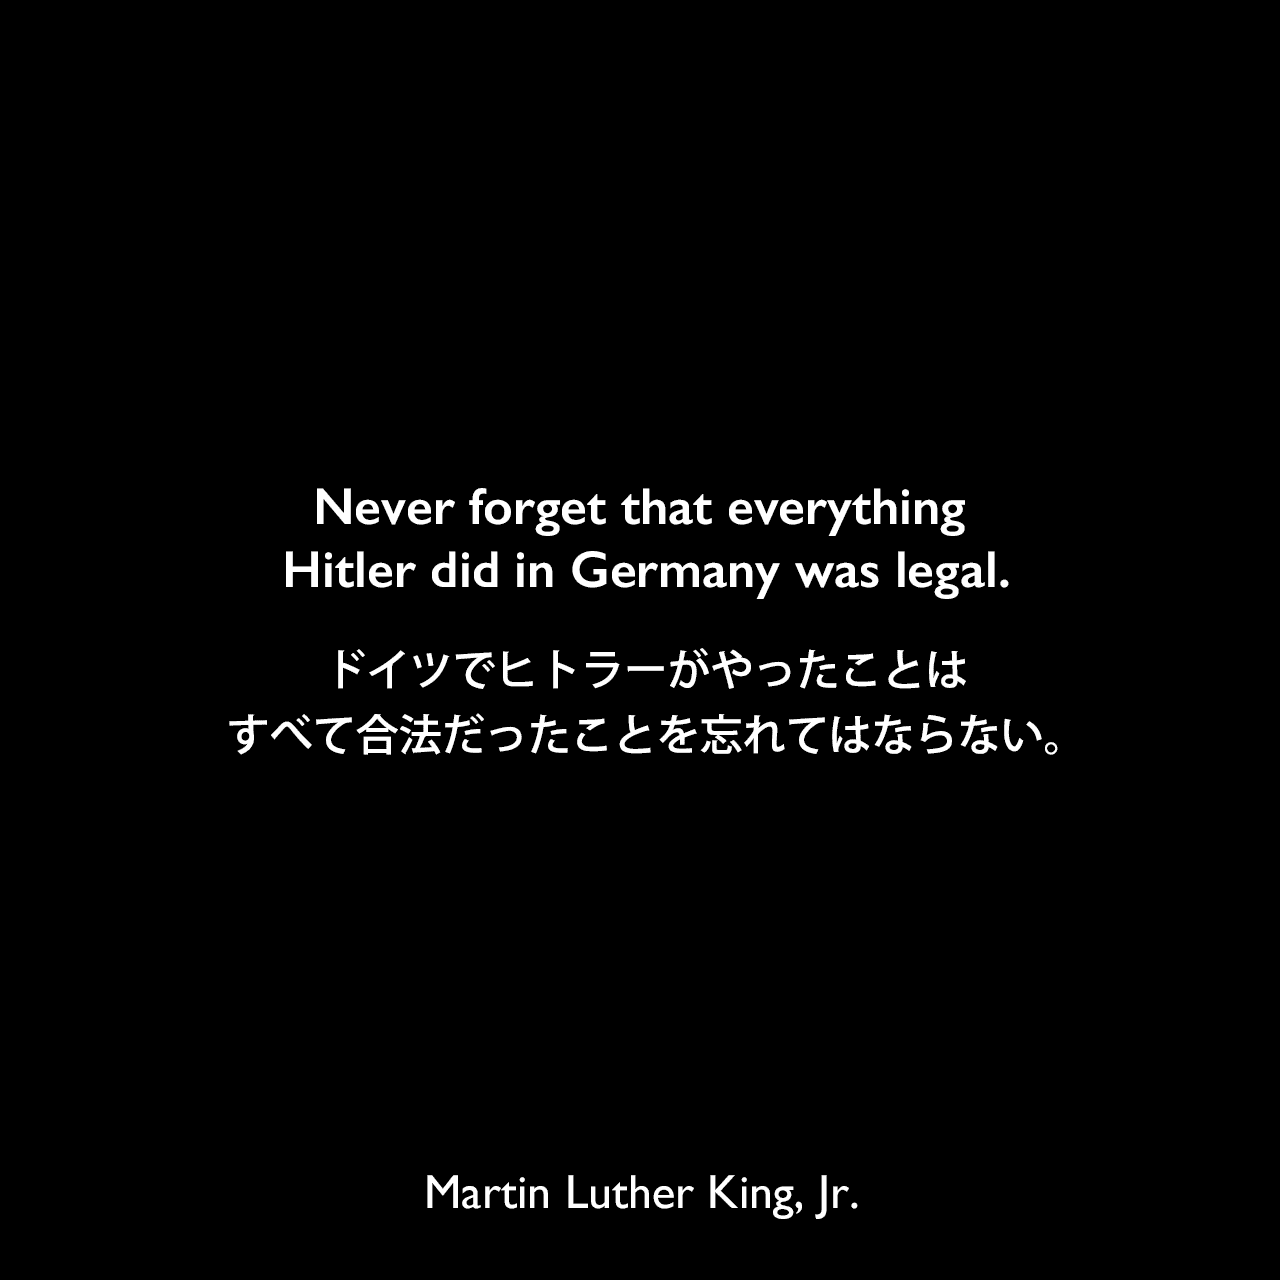 Never forget that everything Hitler did in Germany was legal.ドイツでヒトラーがやったことはすべて合法だったことを忘れてはならない。Martin Luther King, Jr.